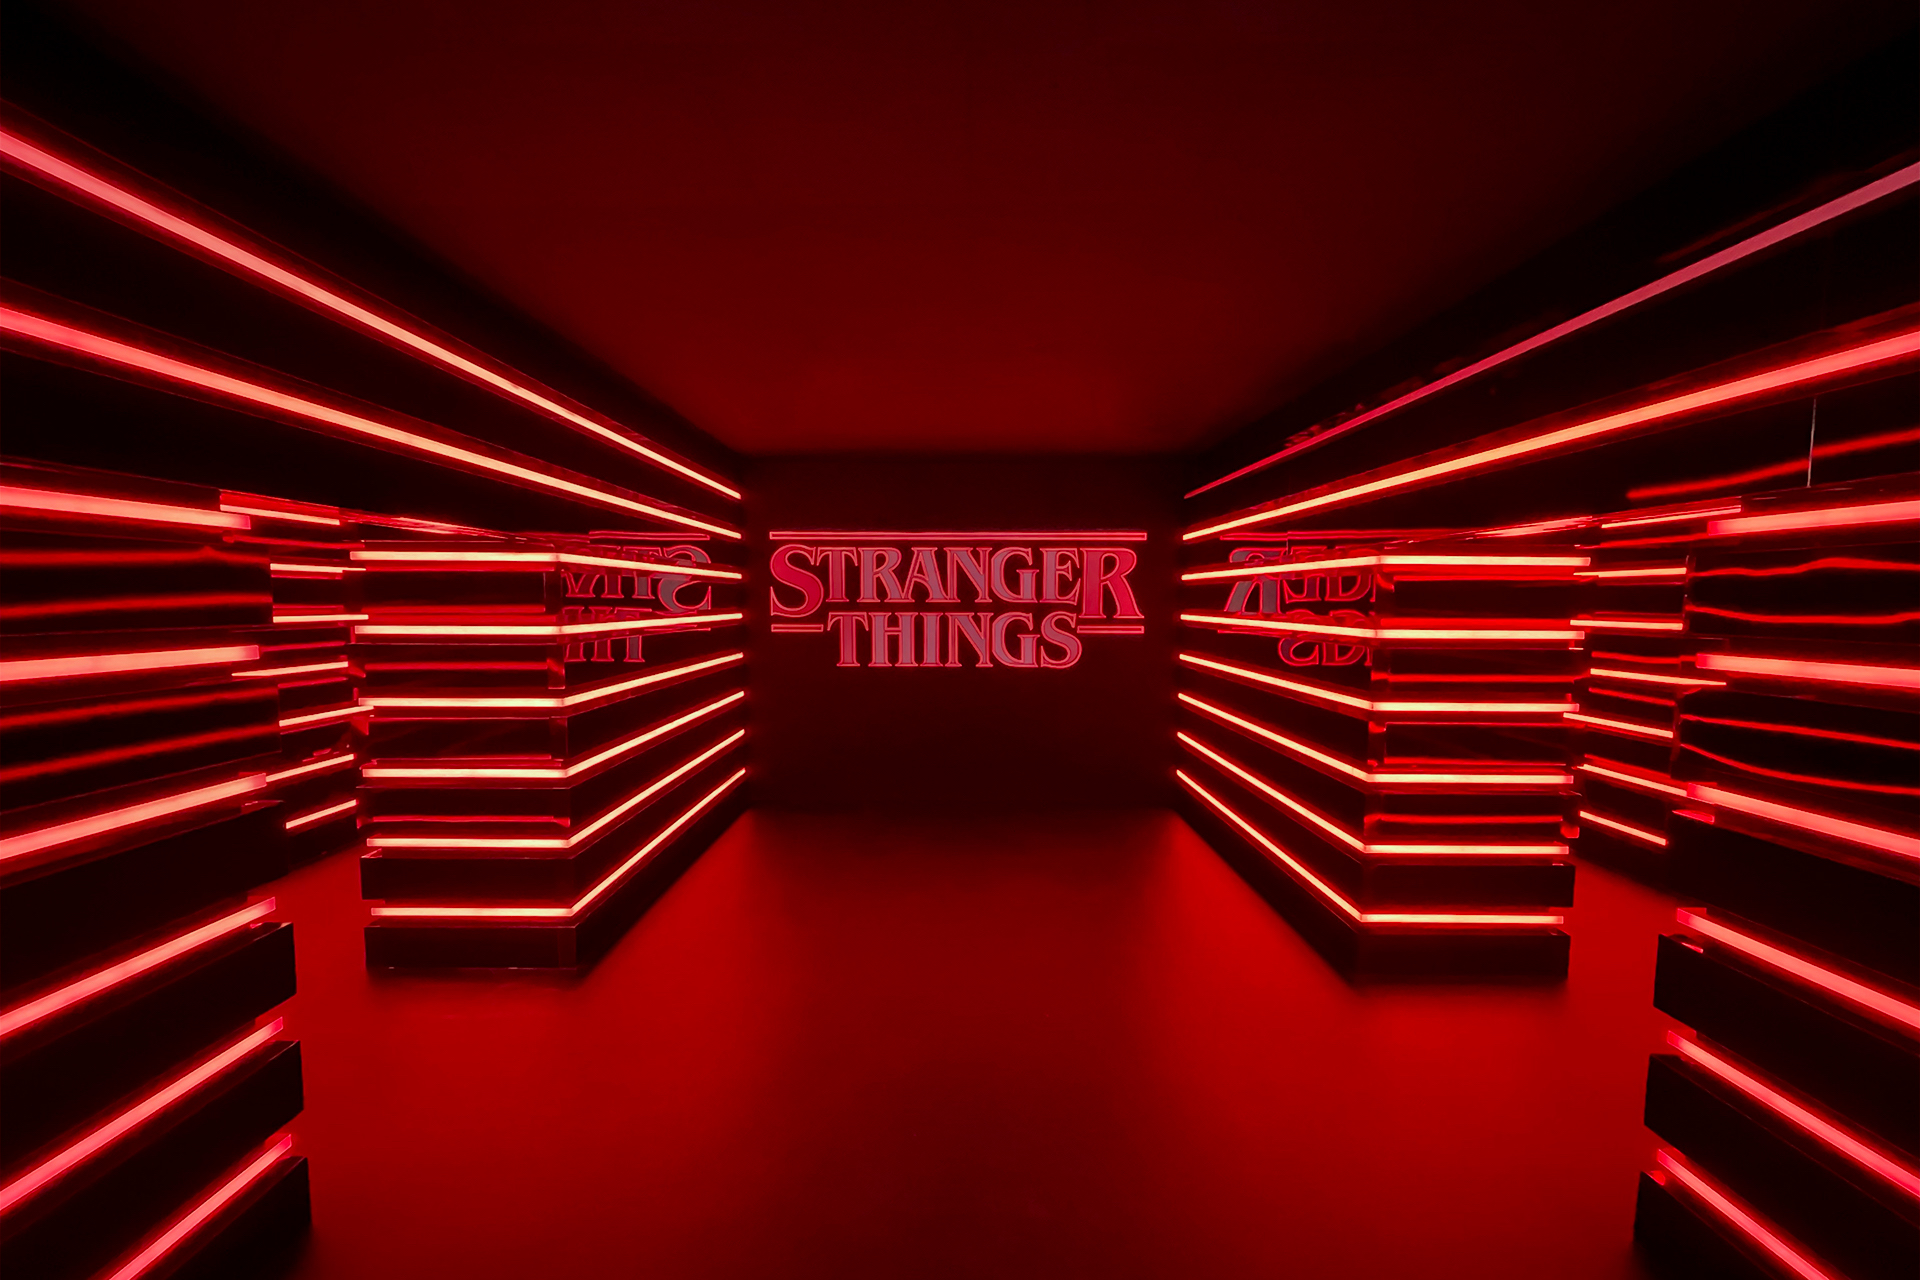 Il pop up ufficiale di Stranger Things a Milano